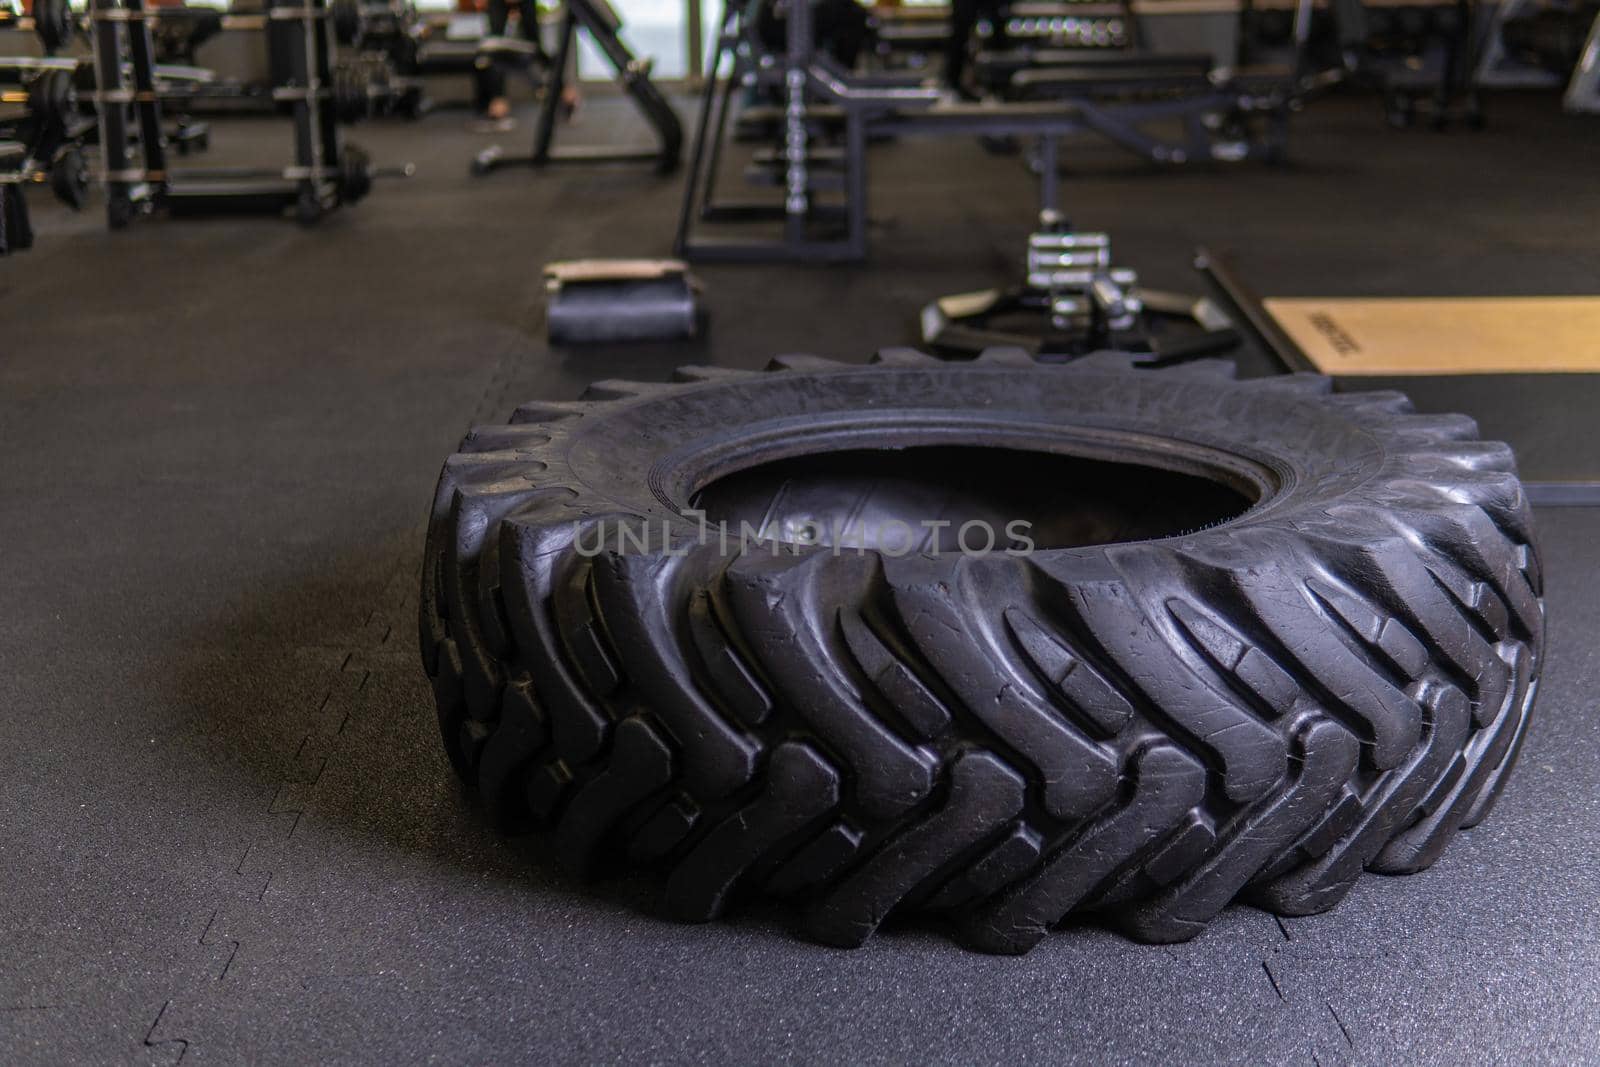 A tire on a black background with a sledgehammer lies for crosfit fitness wheel sledgehammer workout black tire, from fit exercise in adult concentration push, big activity. Sweat dedication up,